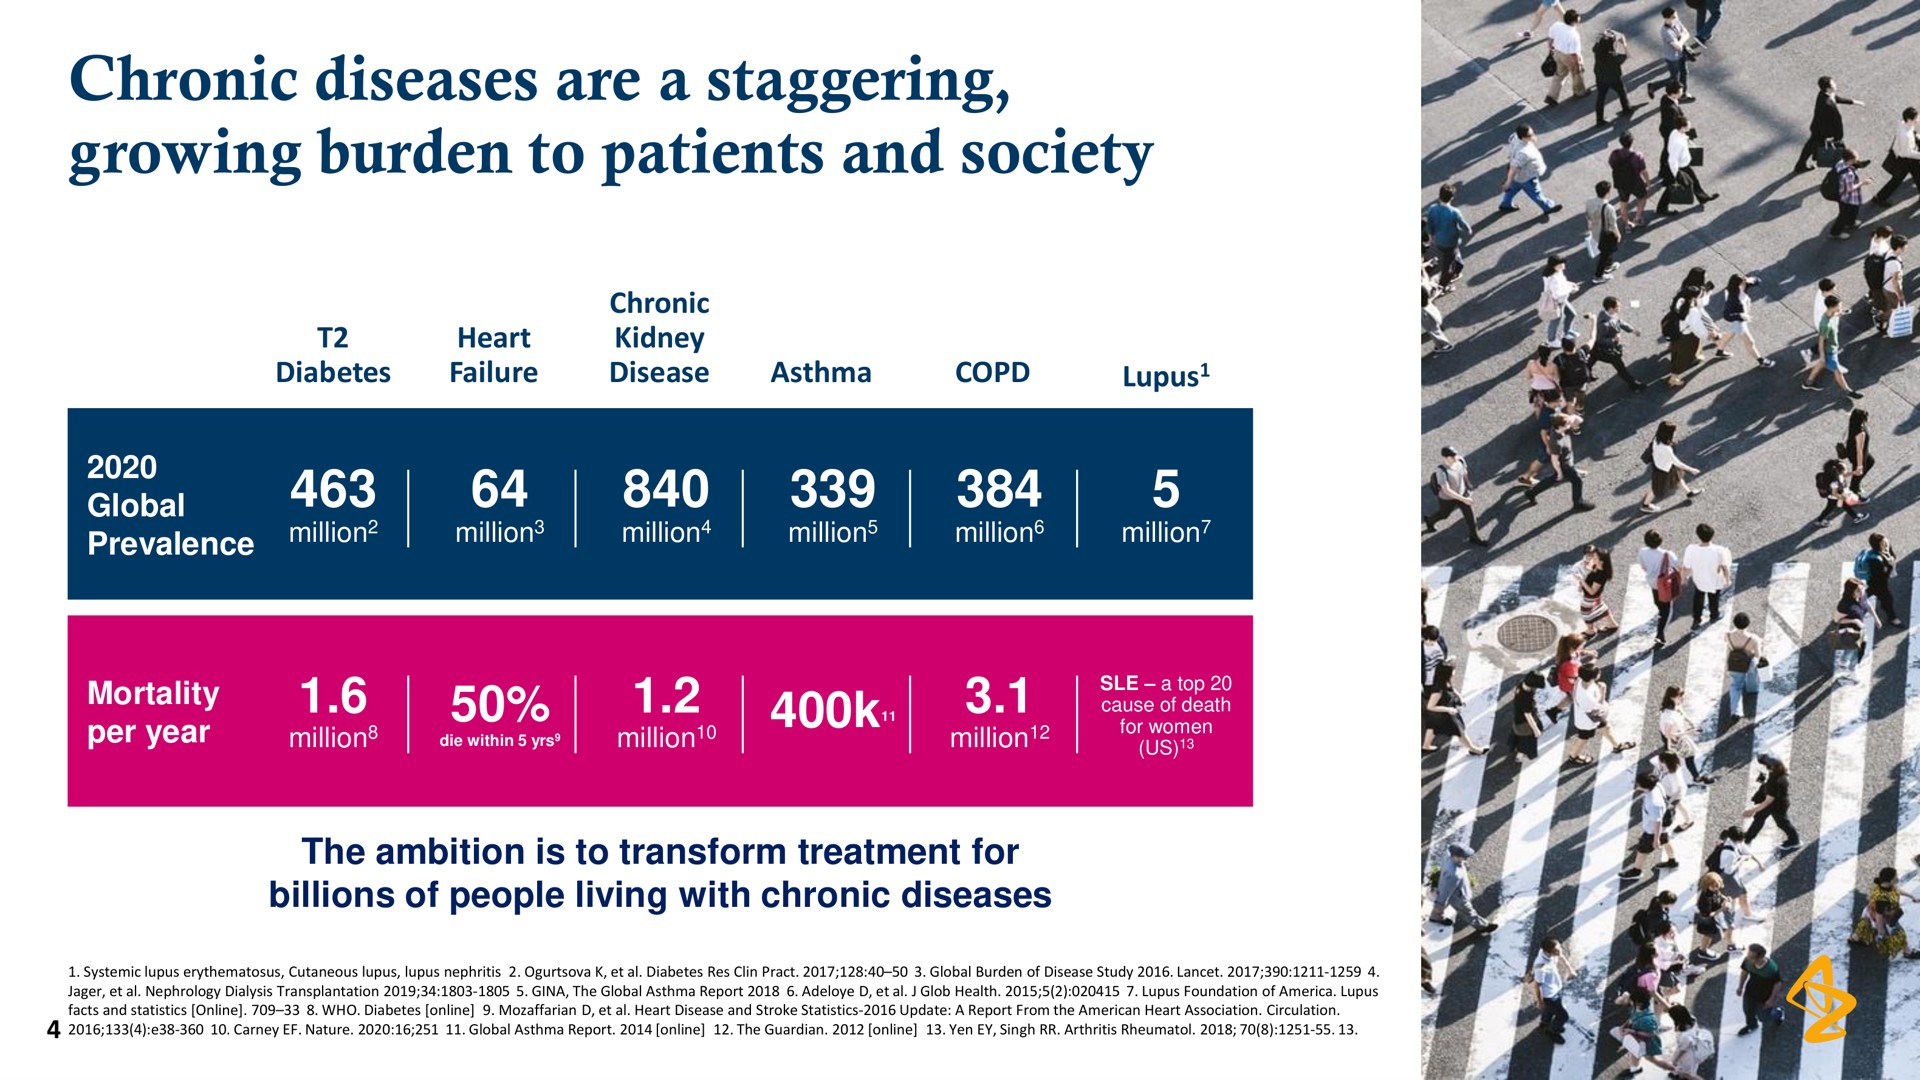 chronic diseases are a staggering growing burden to patients and society | AstraZeneca